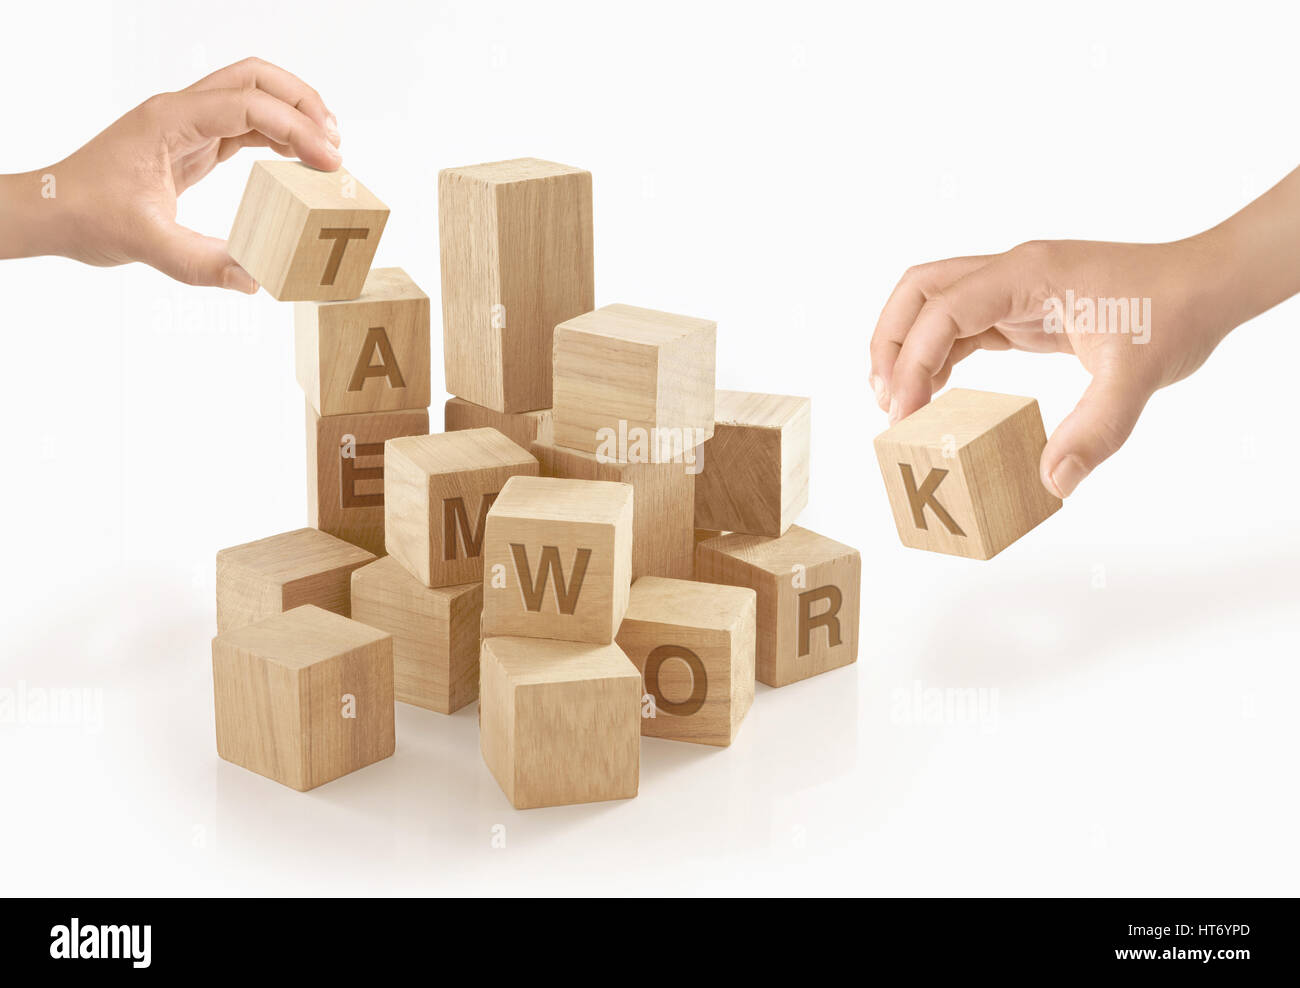 Teamwork & collaboration concept on isolated background. Stock Photo